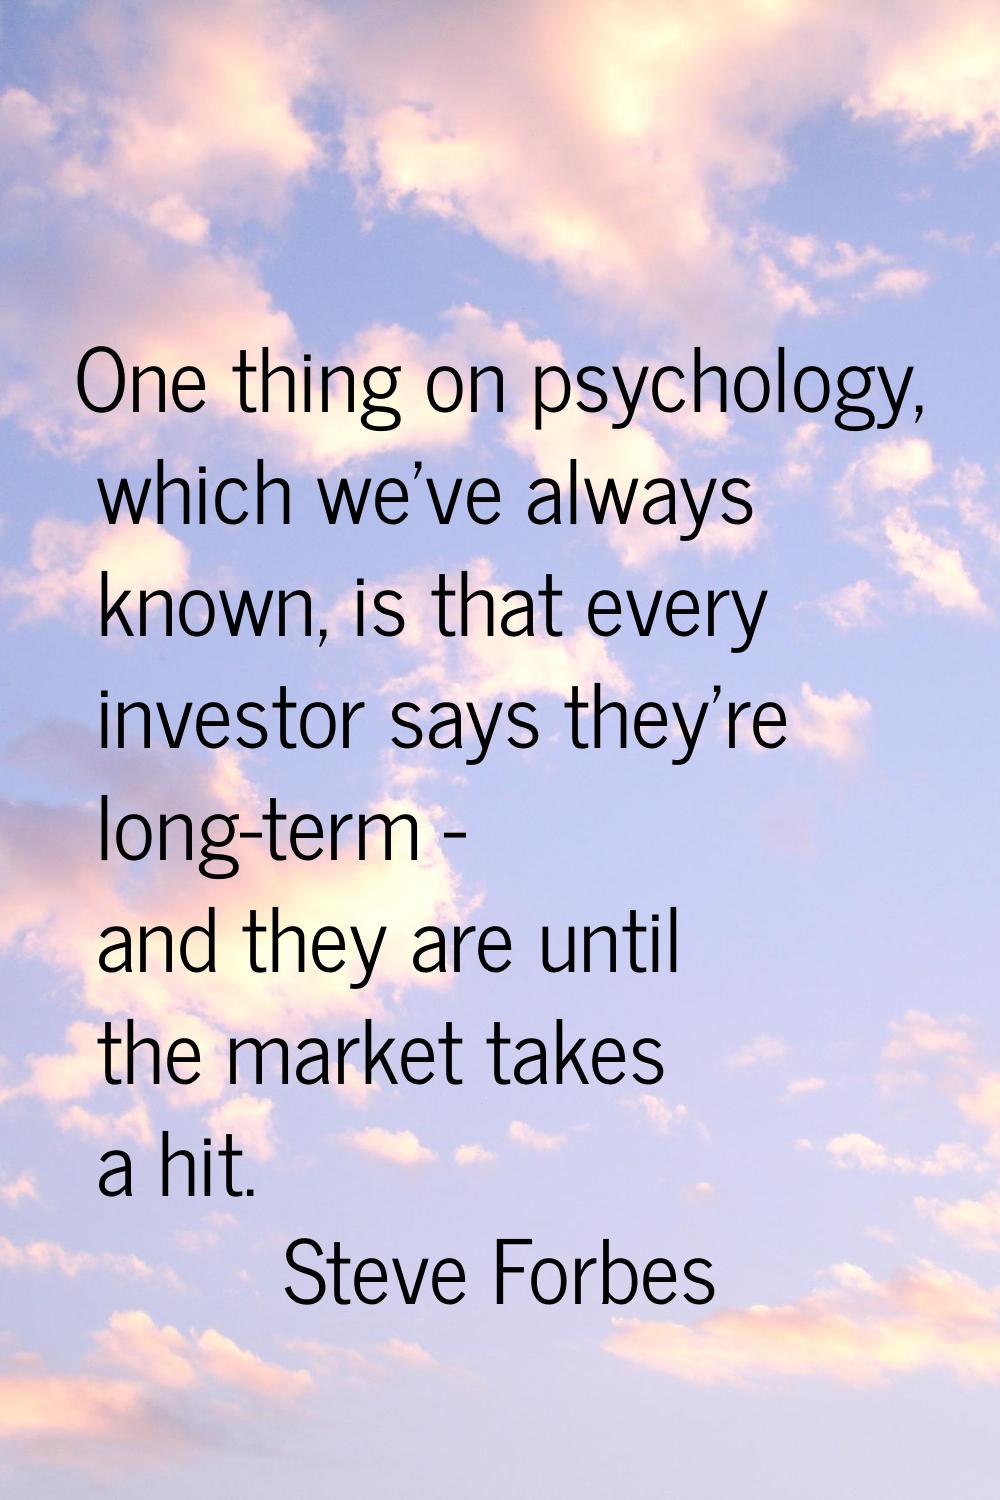 One thing on psychology, which we've always known, is that every investor says they're long-term - 